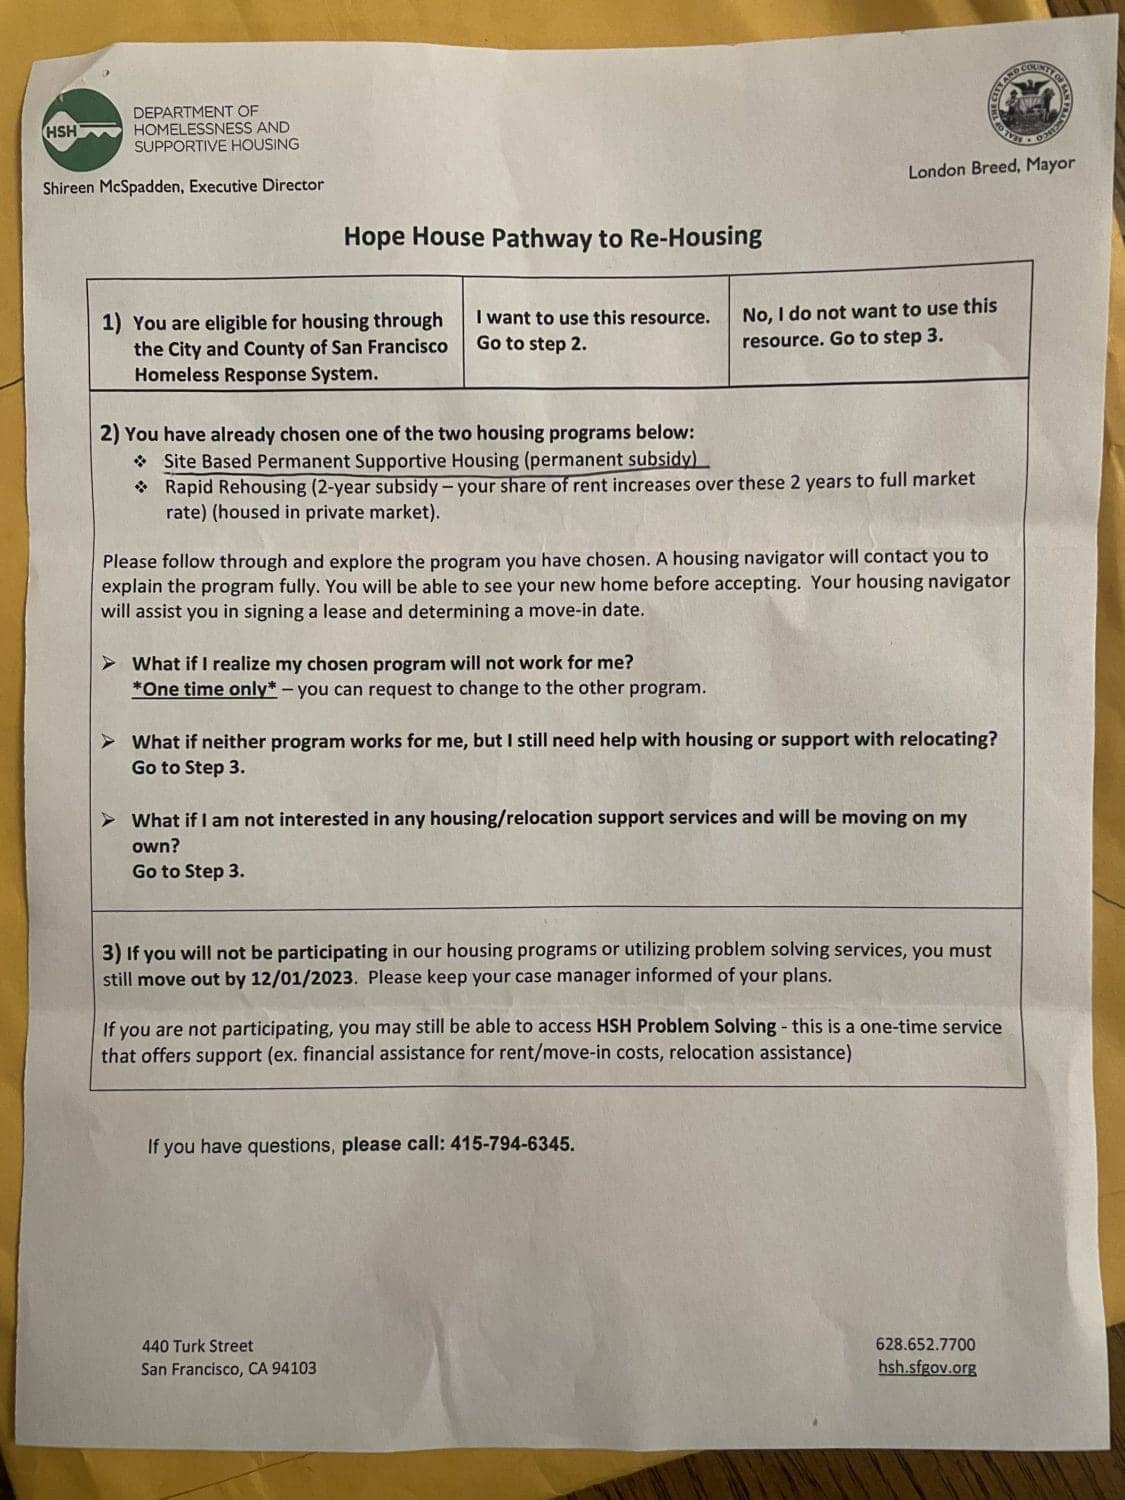 Pathway-to-housing-letter-from-Felton-Institute-to-Jose-Reyes, Dozens of disabled, chronically homeless people face eviction from Bayview homes, Featured Local News & Views News & Views 